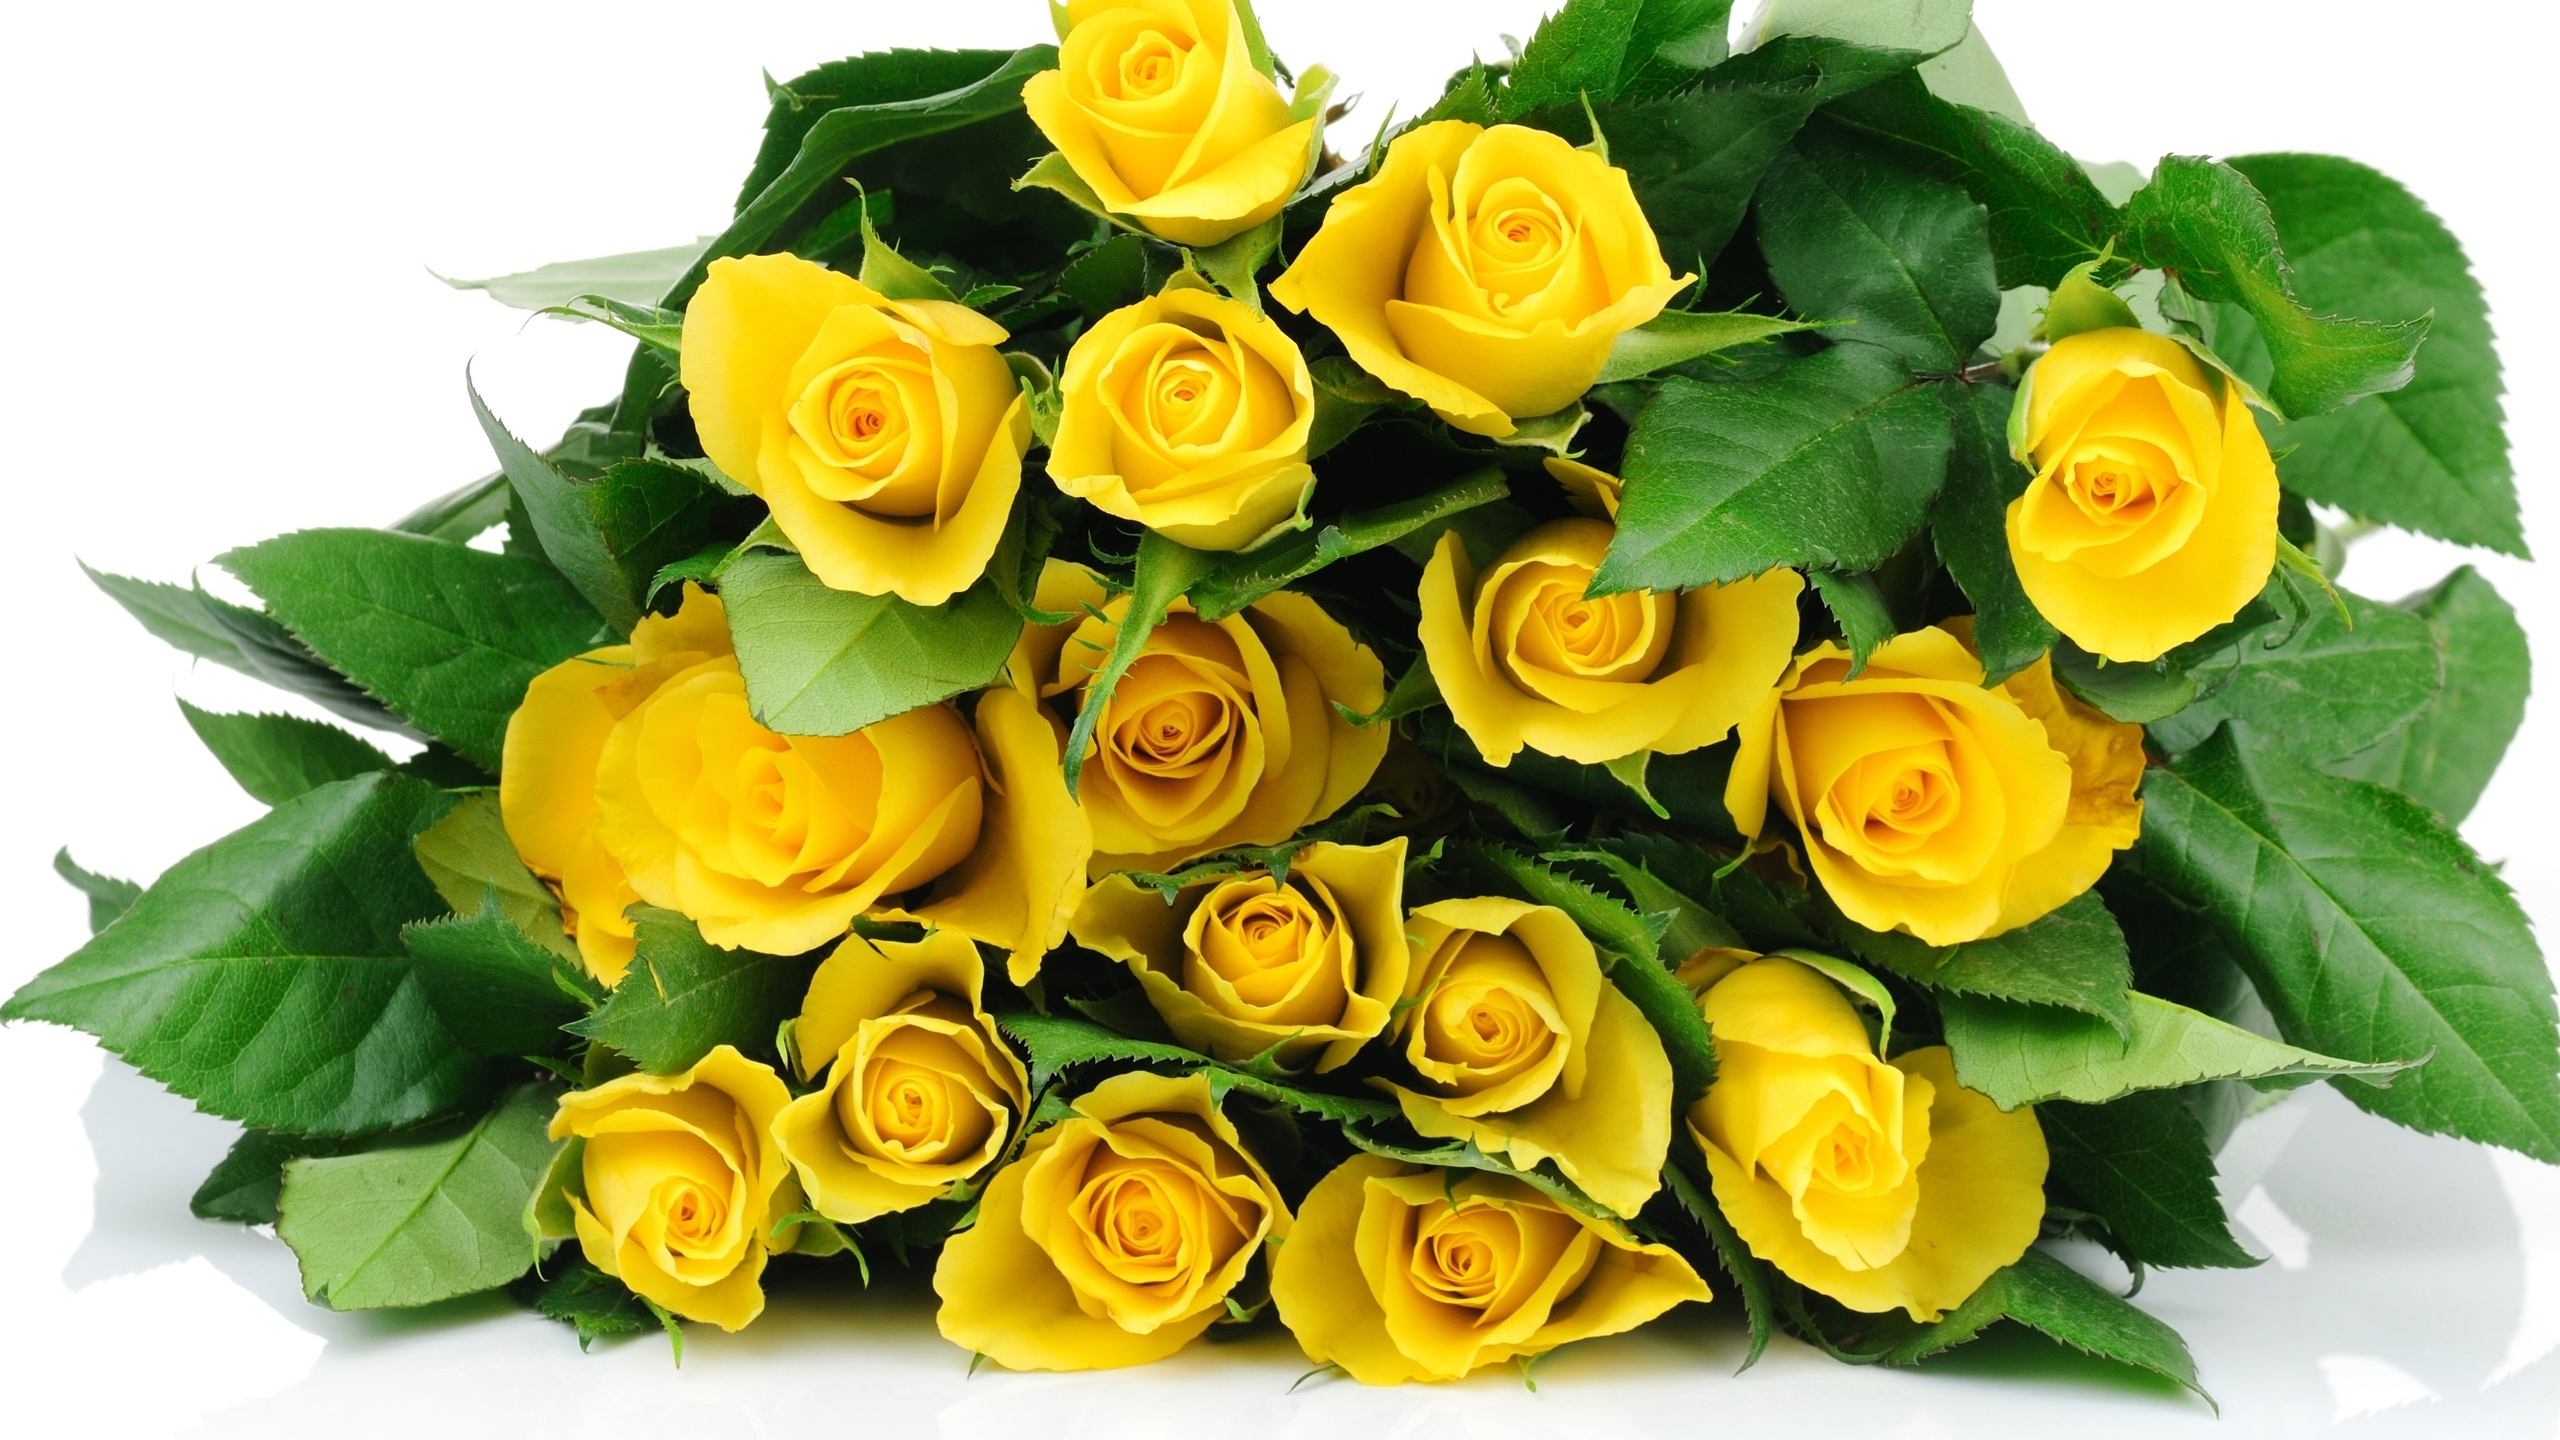 Yellow Roses Bucket for 2560x1440 HDTV resolution